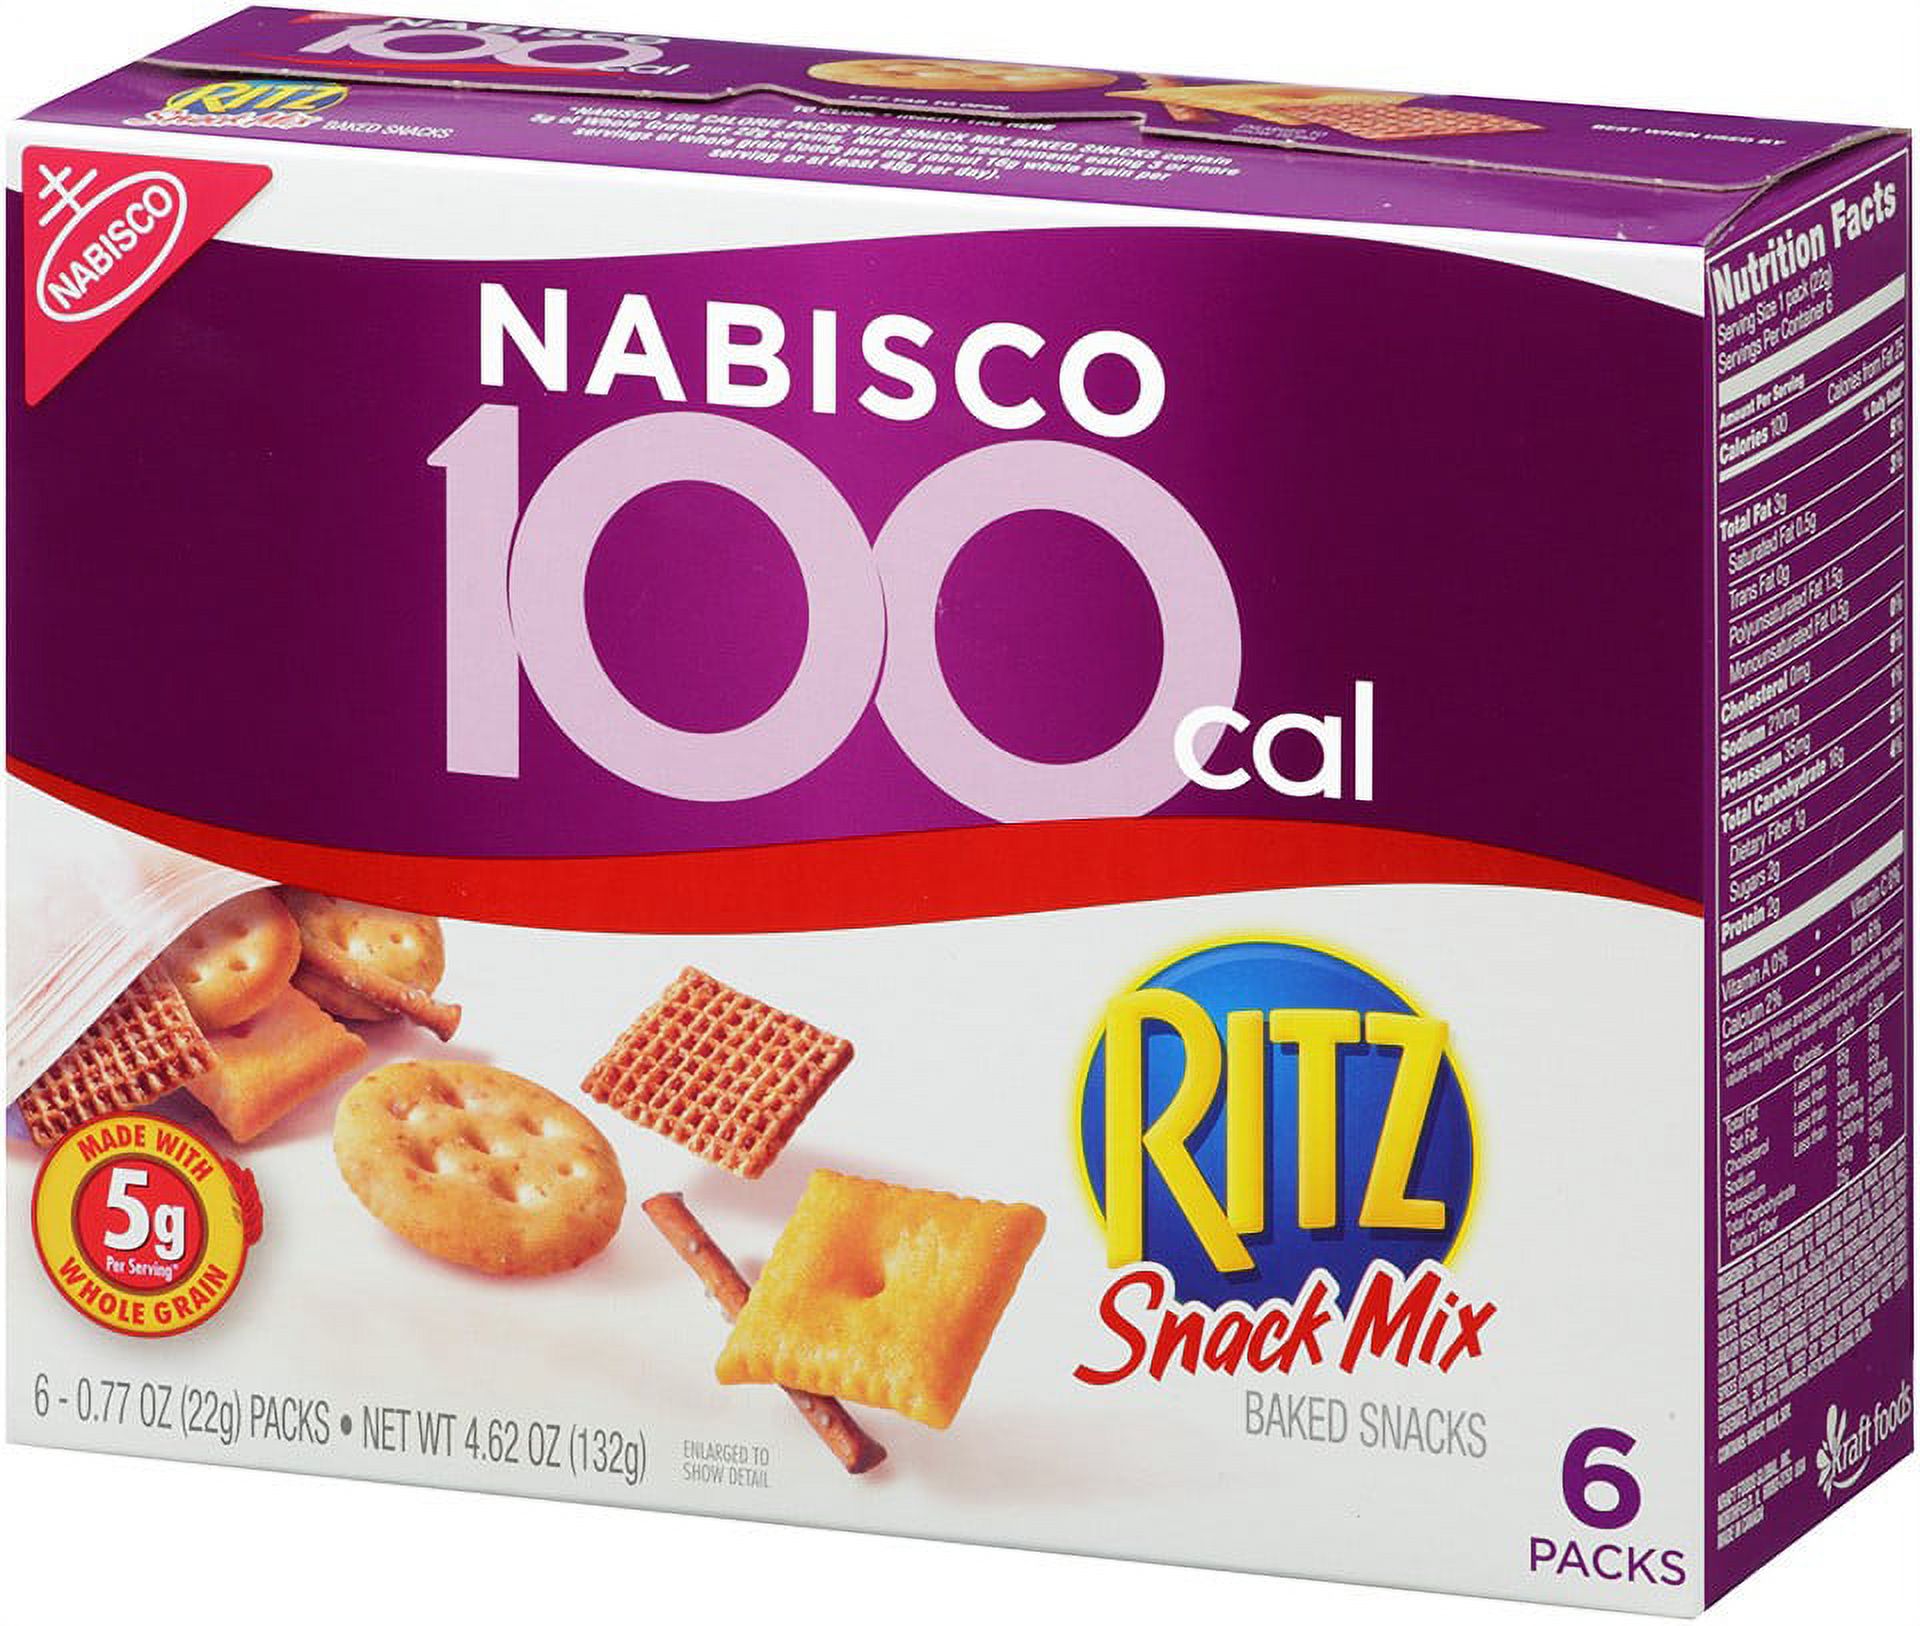 Nabisco 100 Cal Ritz Snack Mix Baked Snacks, 0.77 Oz., 6 Count - image 2 of 4